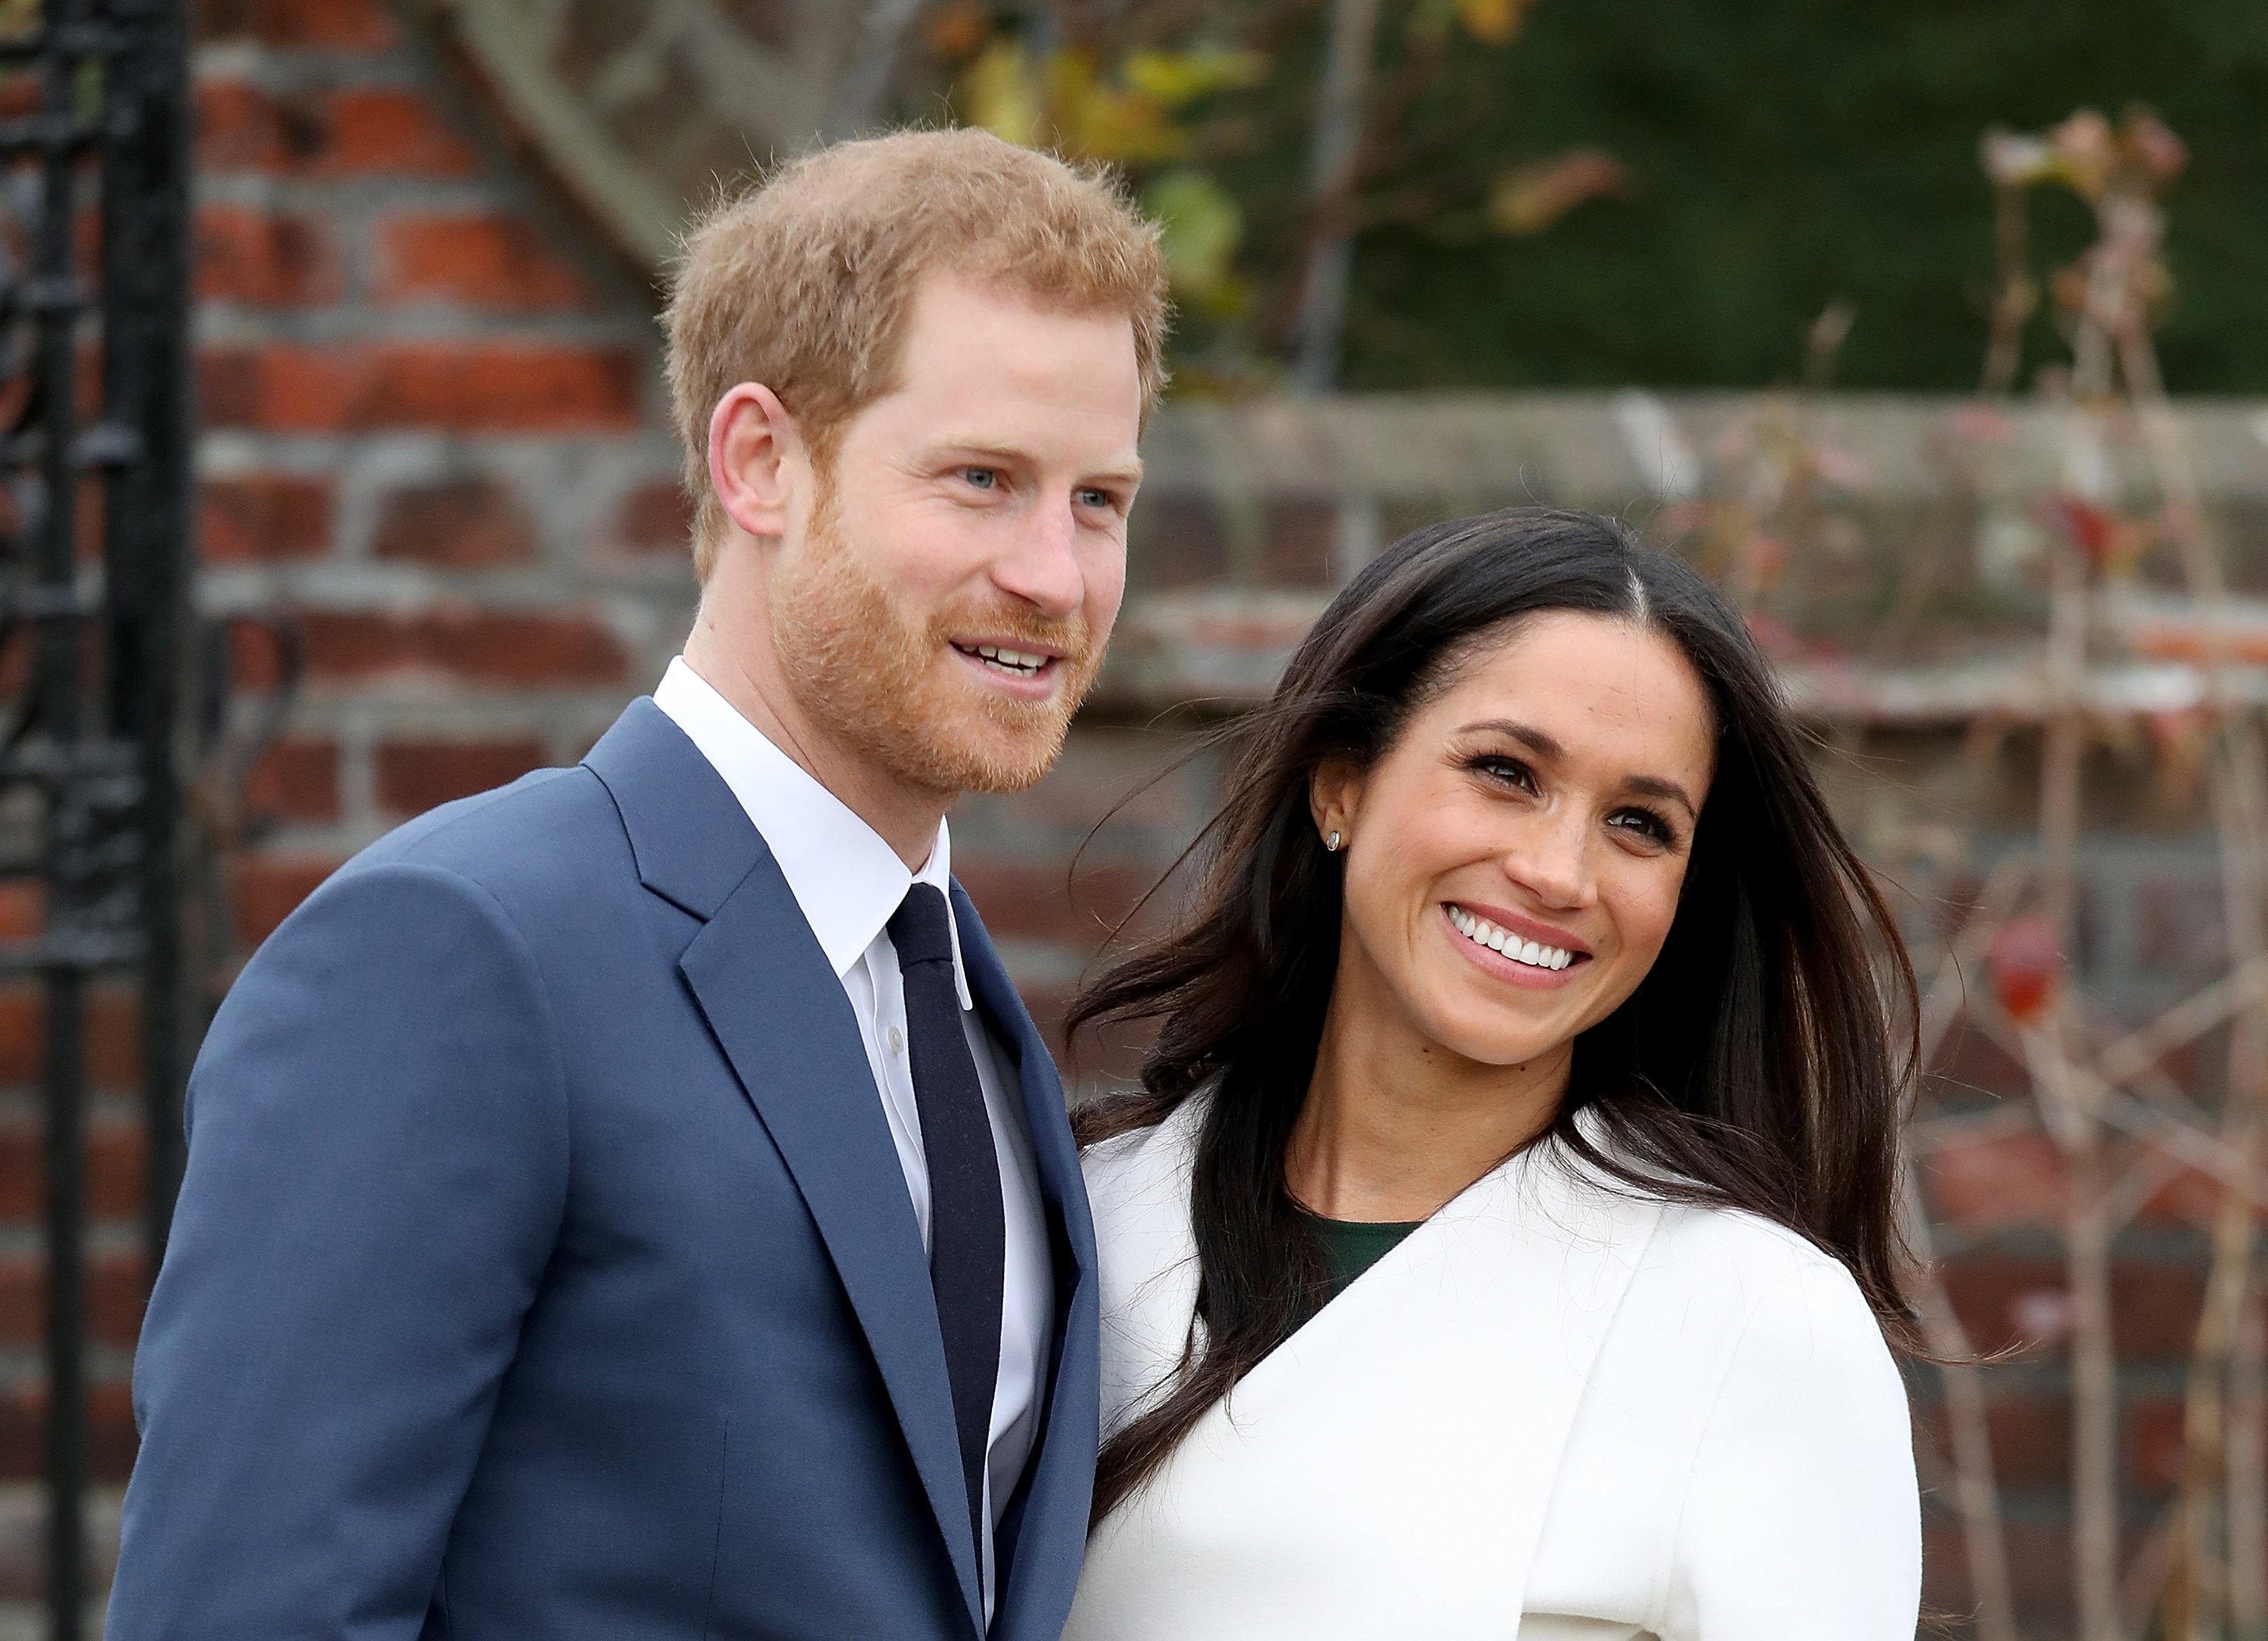 Prince Harry and former "Suits" actress Meghan Markle is the main theme of the book, "Finding Freedom: Harry and Meghan and the Making of a Modern Royal Family," written by Authored by Omid Scobie and Carlyn Durand. | Photo: Getty Images